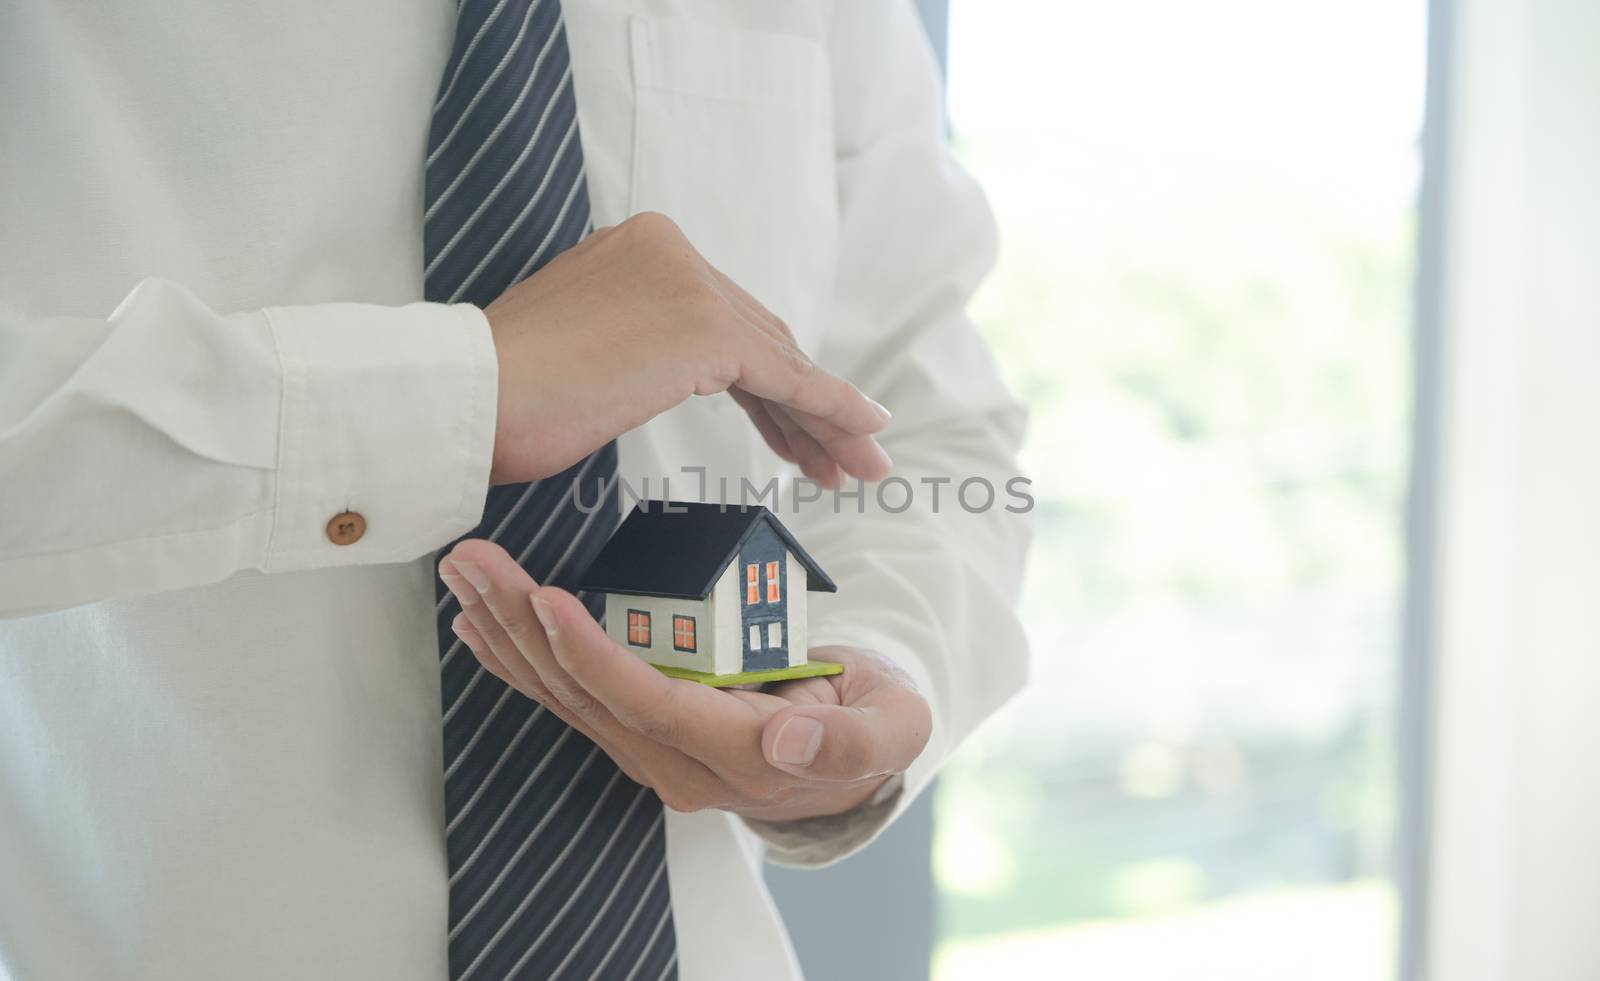 Property insurance concept: Insurance agent holds a house model in hand showing the symbol of home insurance.